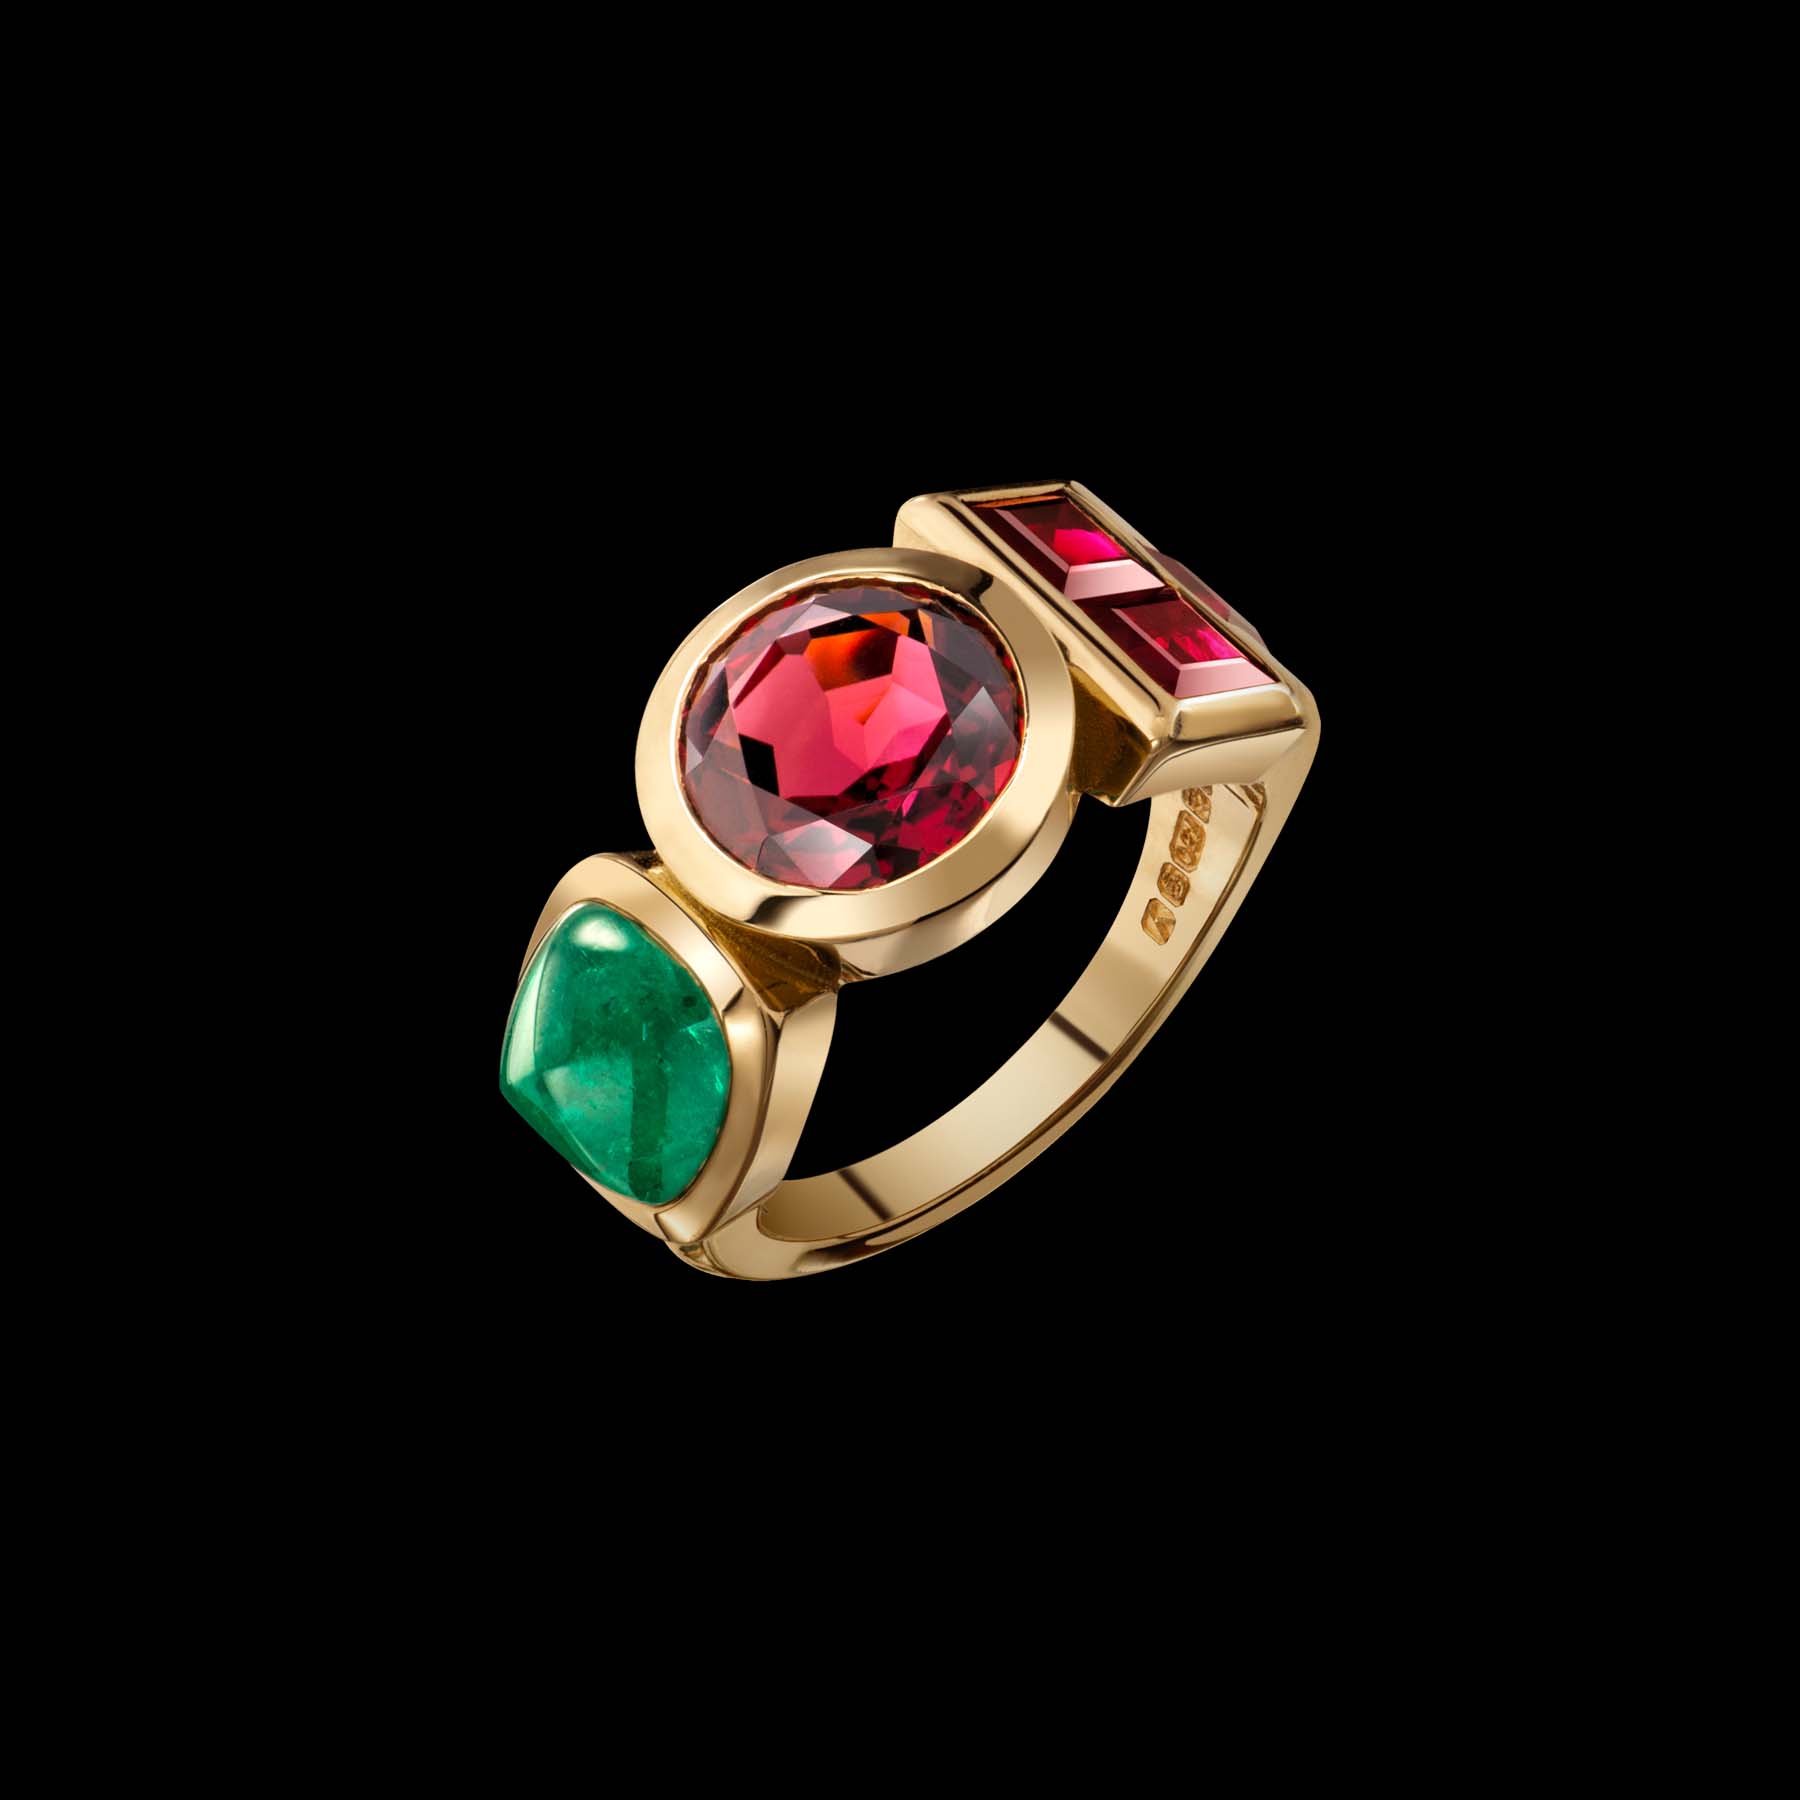 Edible ring by designer Solange Azagury-Partridge - 18k Yellow Gold, Pink Tourmaline - angled view